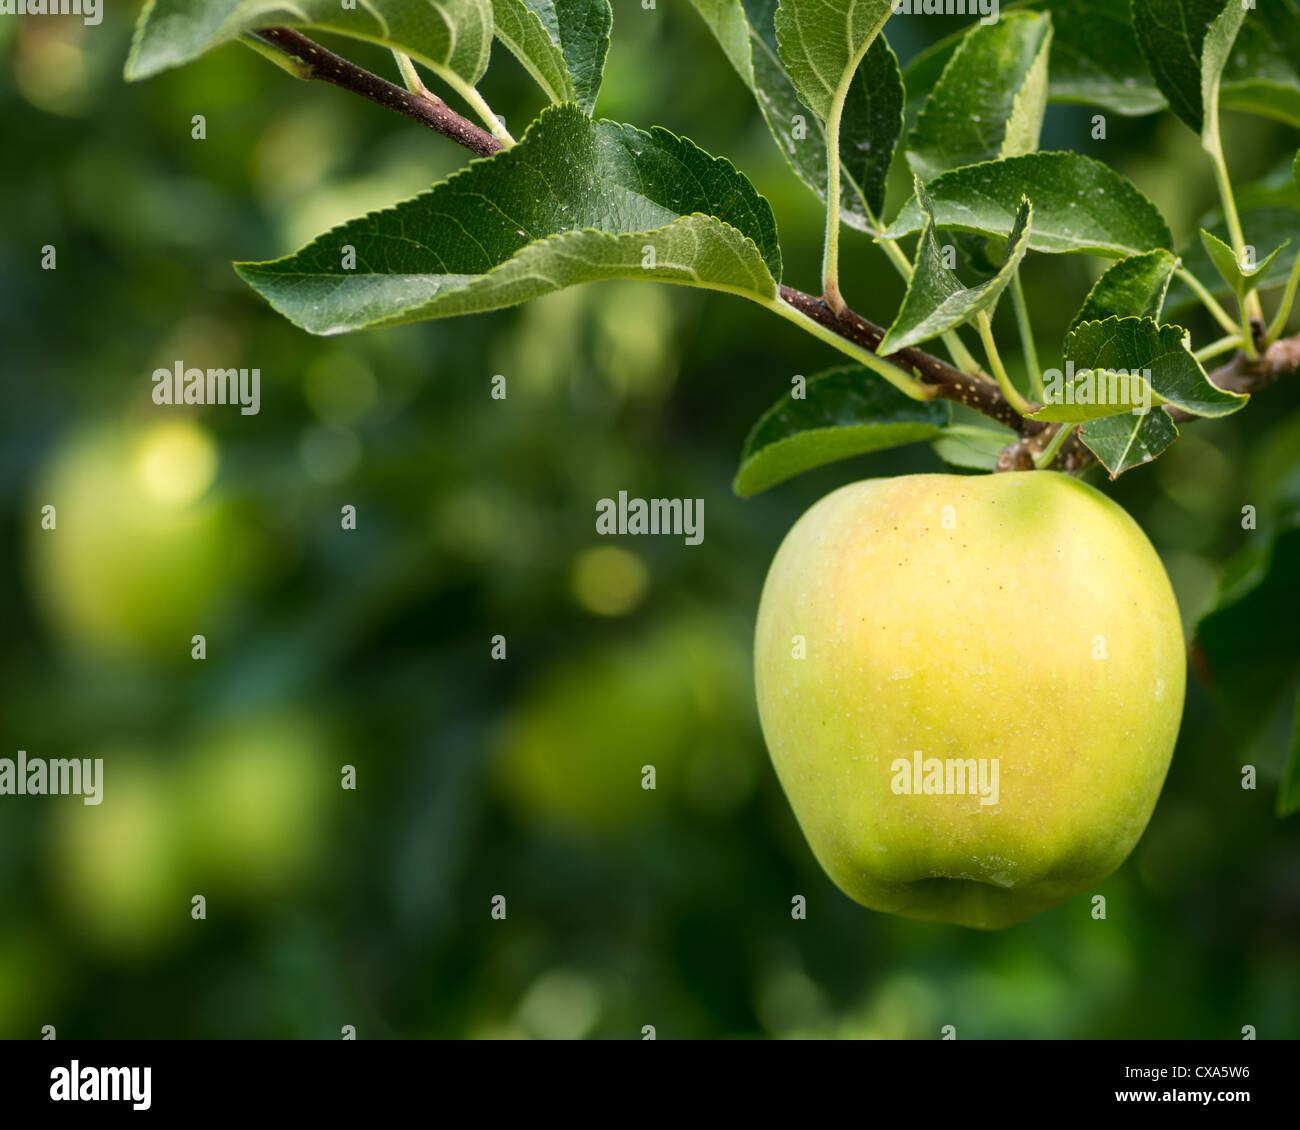 Ripe golden delicious apple hanging on a tree Stock Photo